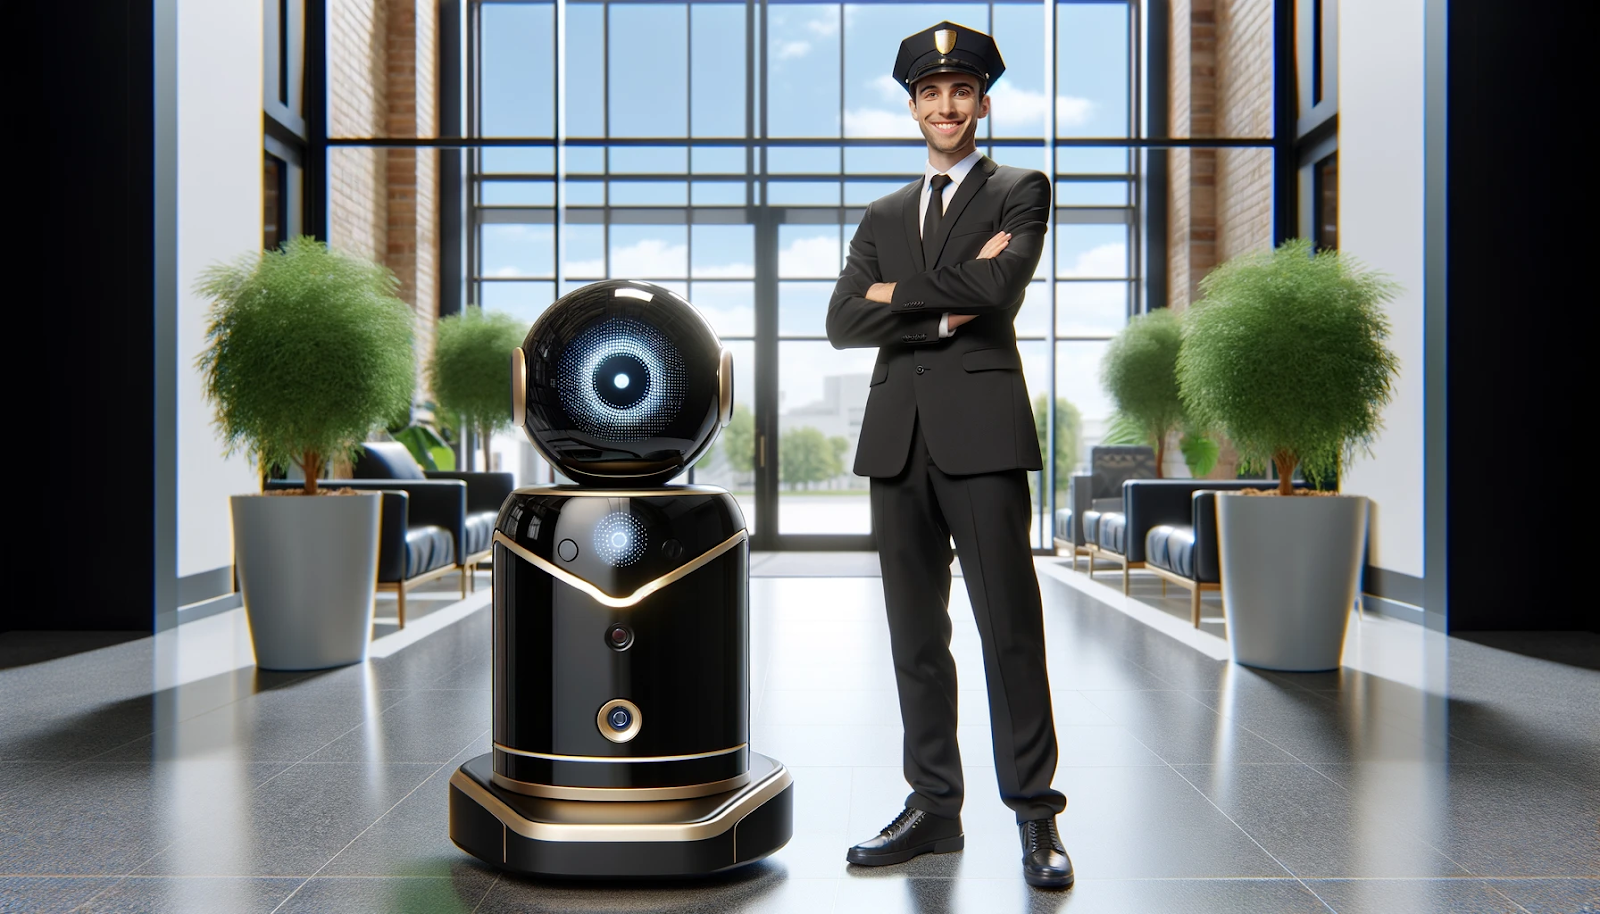 Cheerful security guard standing next to a black and gold autonomous security robot in a bright office lobby, highlighting modern security collaboration